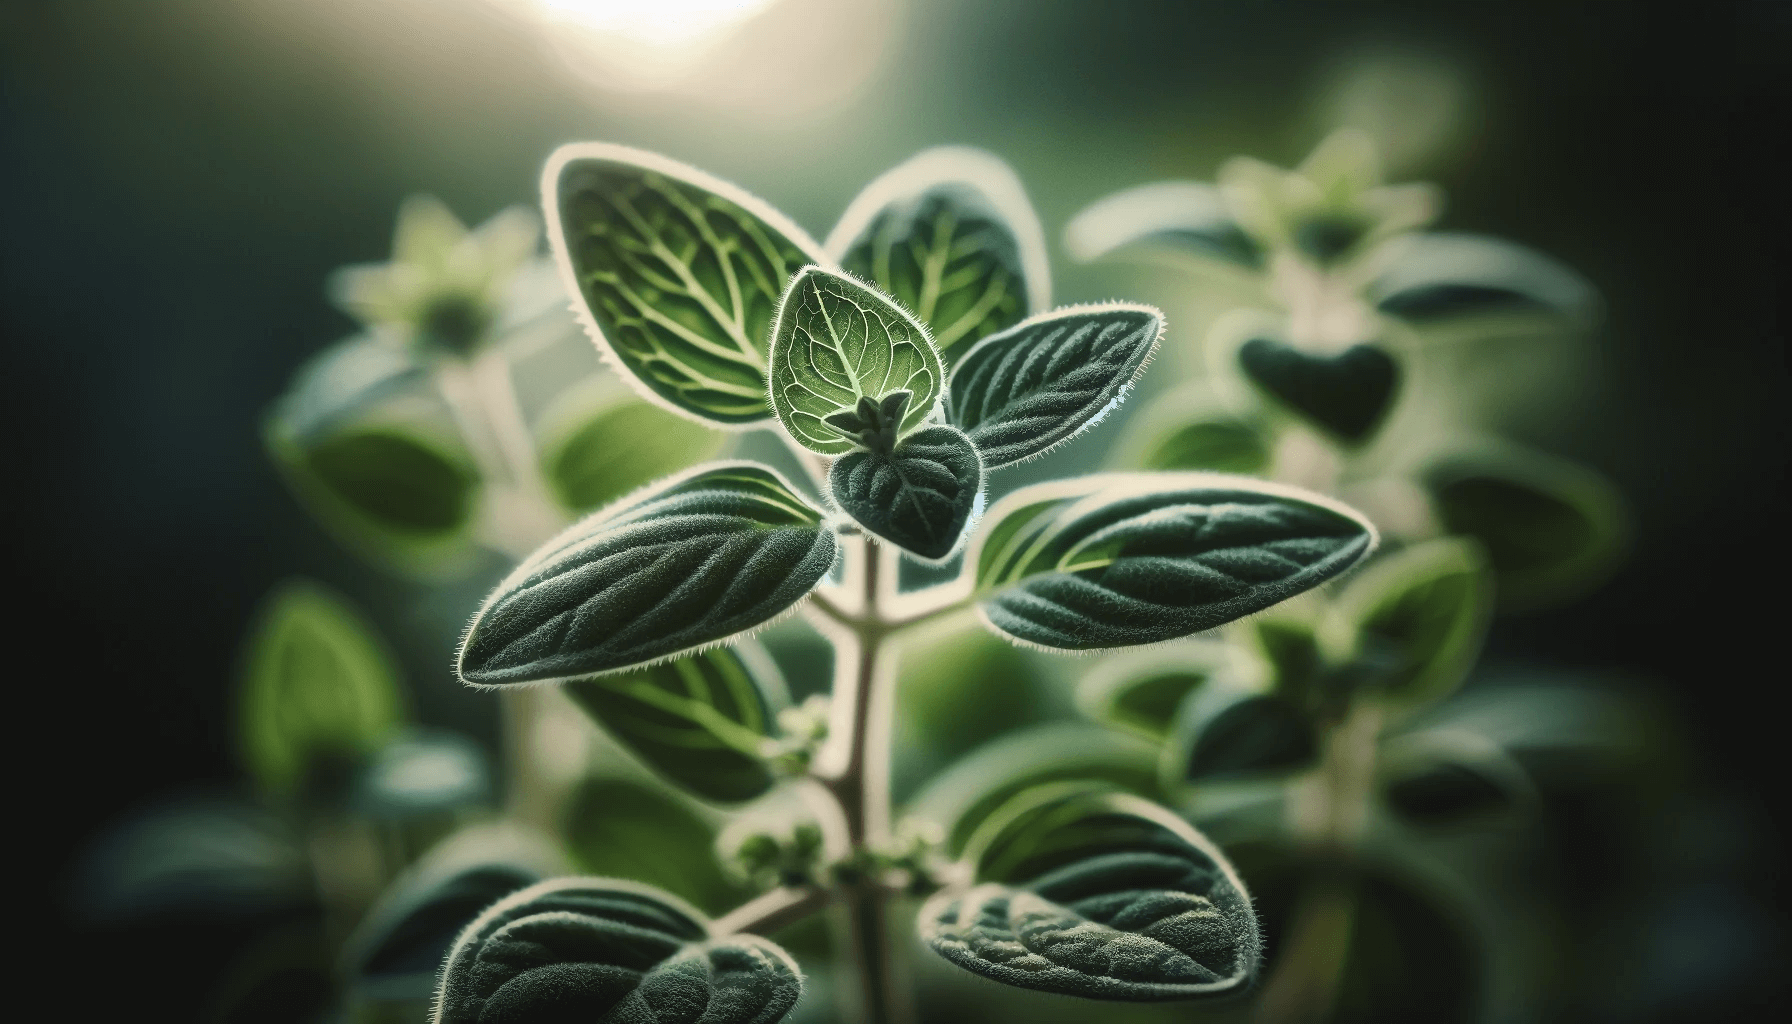 A close-up view of oregano leaves and stems with a sharp focus on the intricate details of the plant, such as the veins and edges of the leaves.